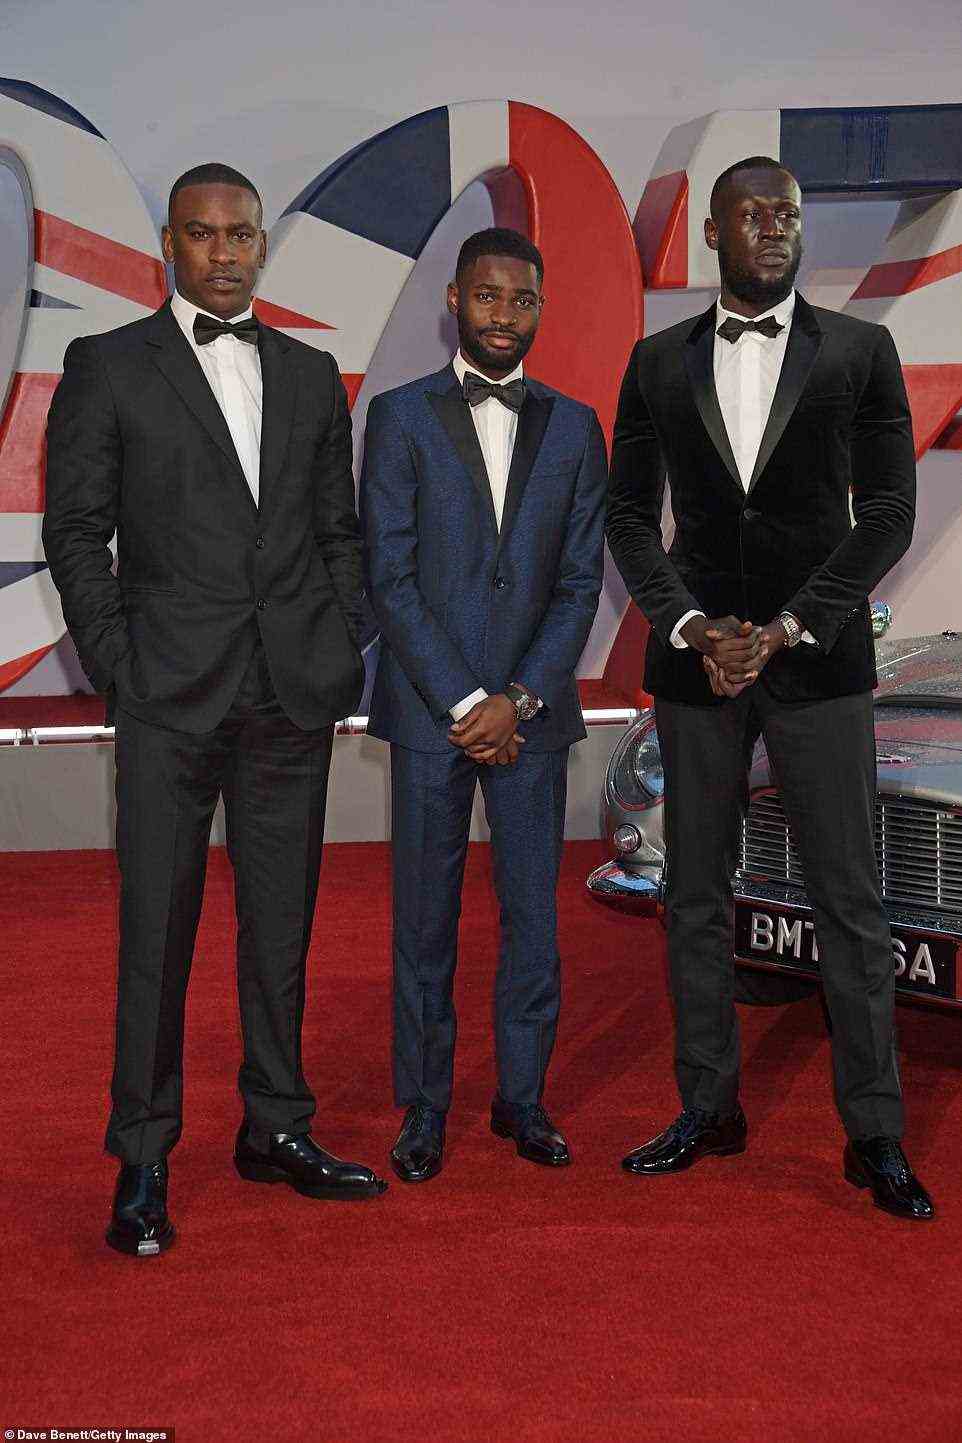 Looking good: Rappers Skepta, Dave and Stormzy posed together on the carpet and all looked equally suave in smartly tailored suits